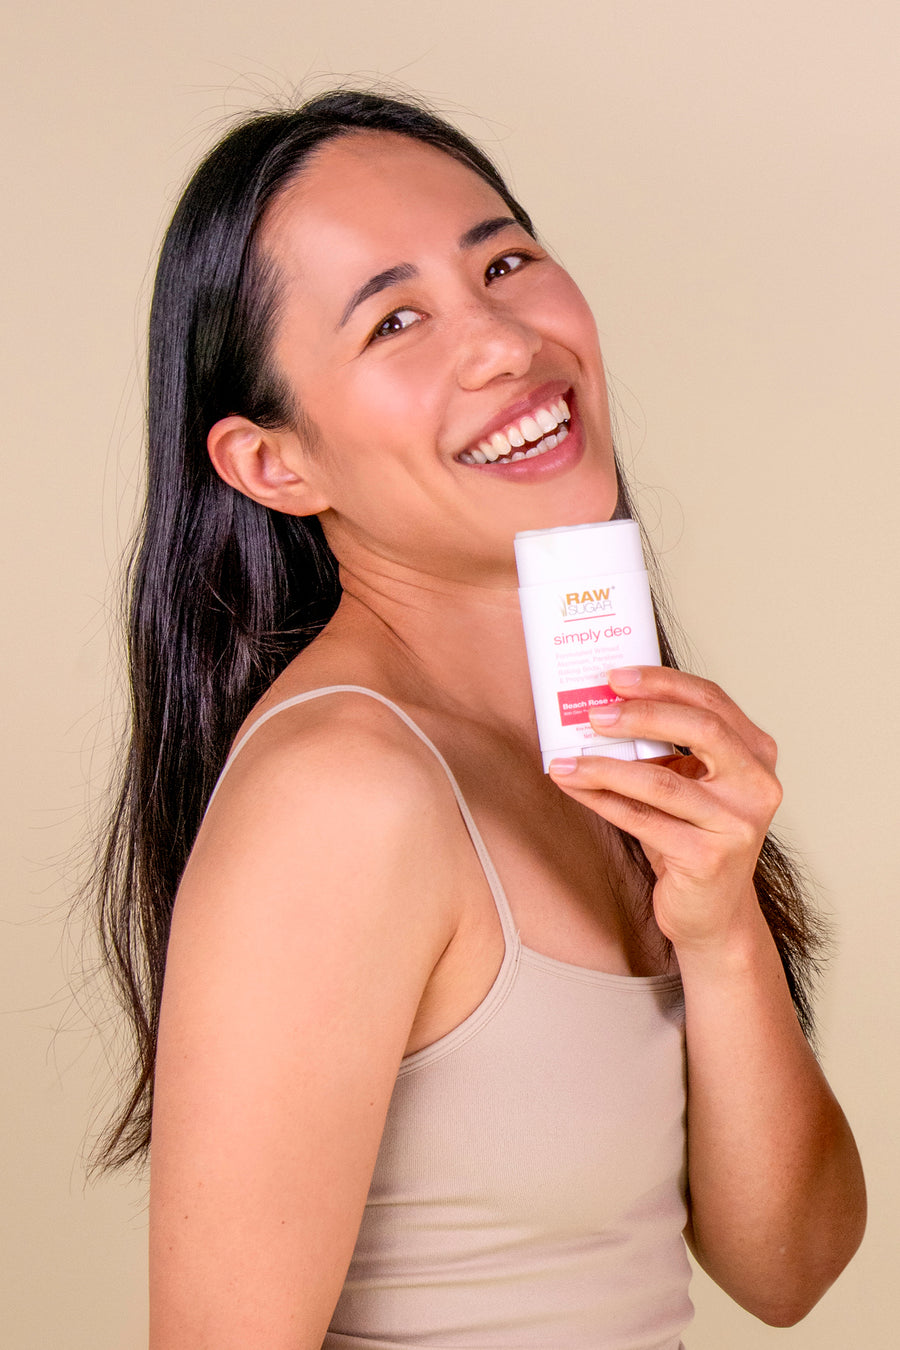 woman holding aluminum free deodorant and smiling